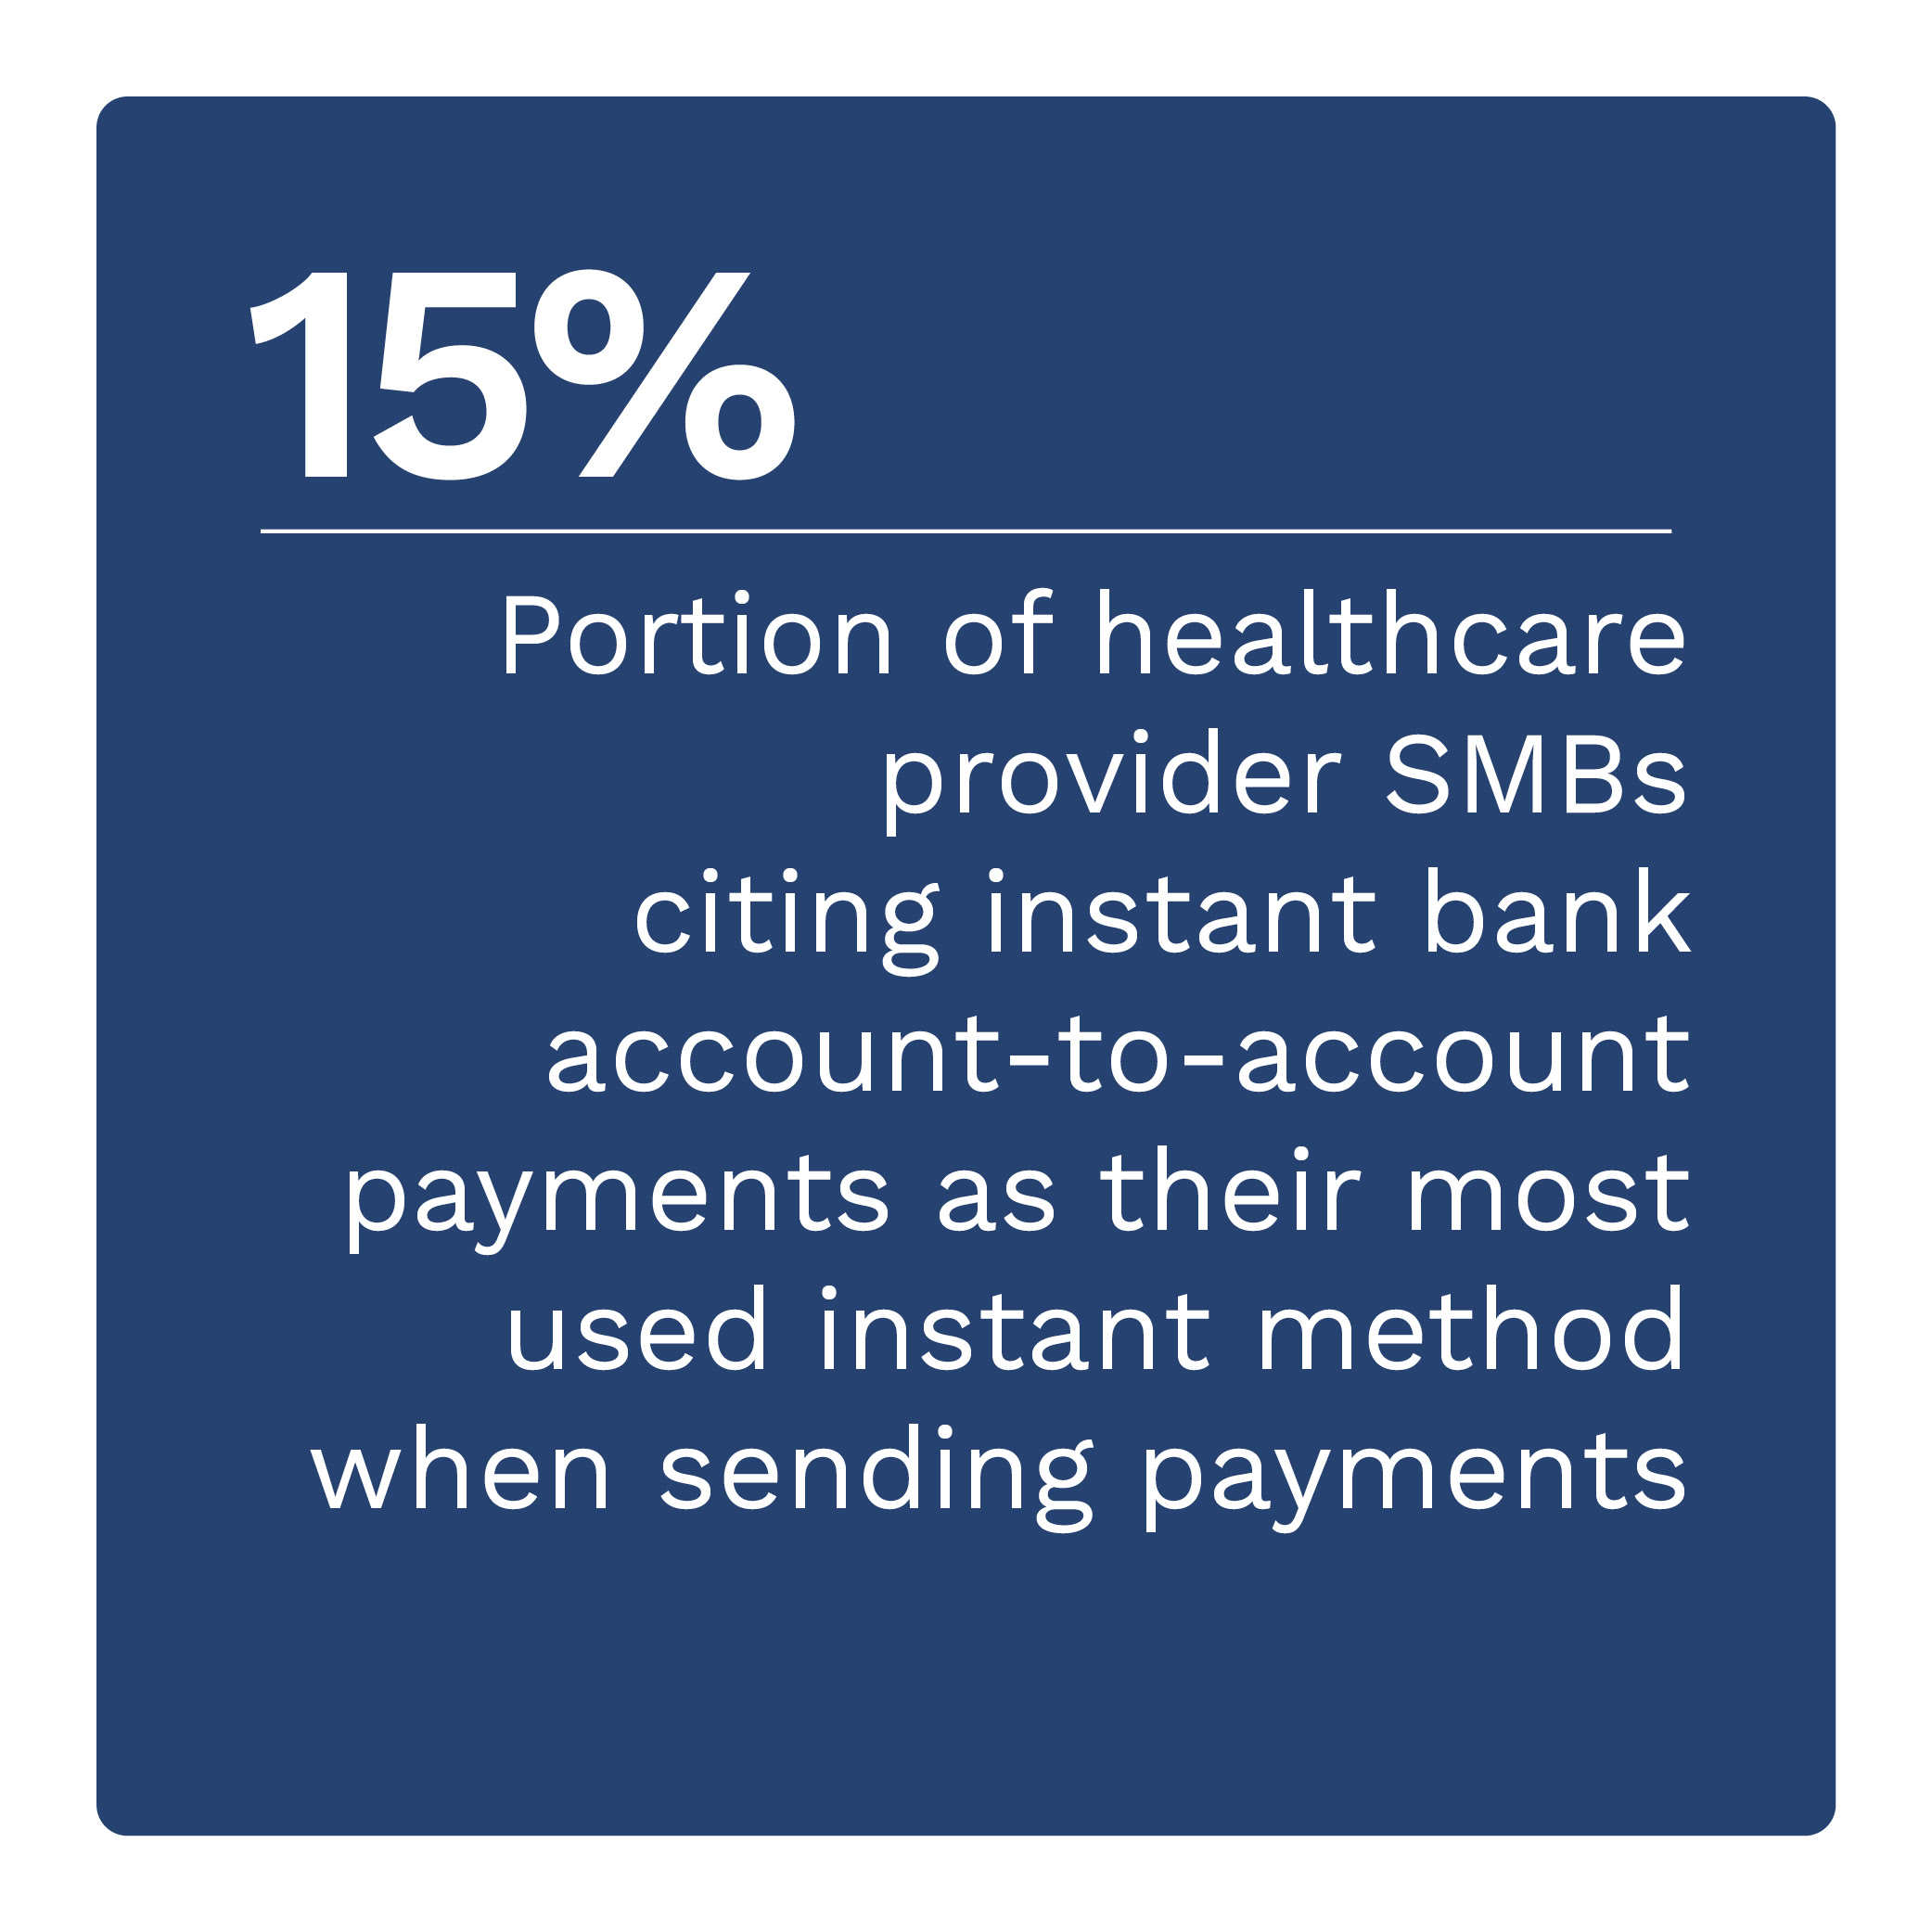  Portion of healthcare provider SMBs citing instant bank account-to-account payments as their most used instant method when sending payments